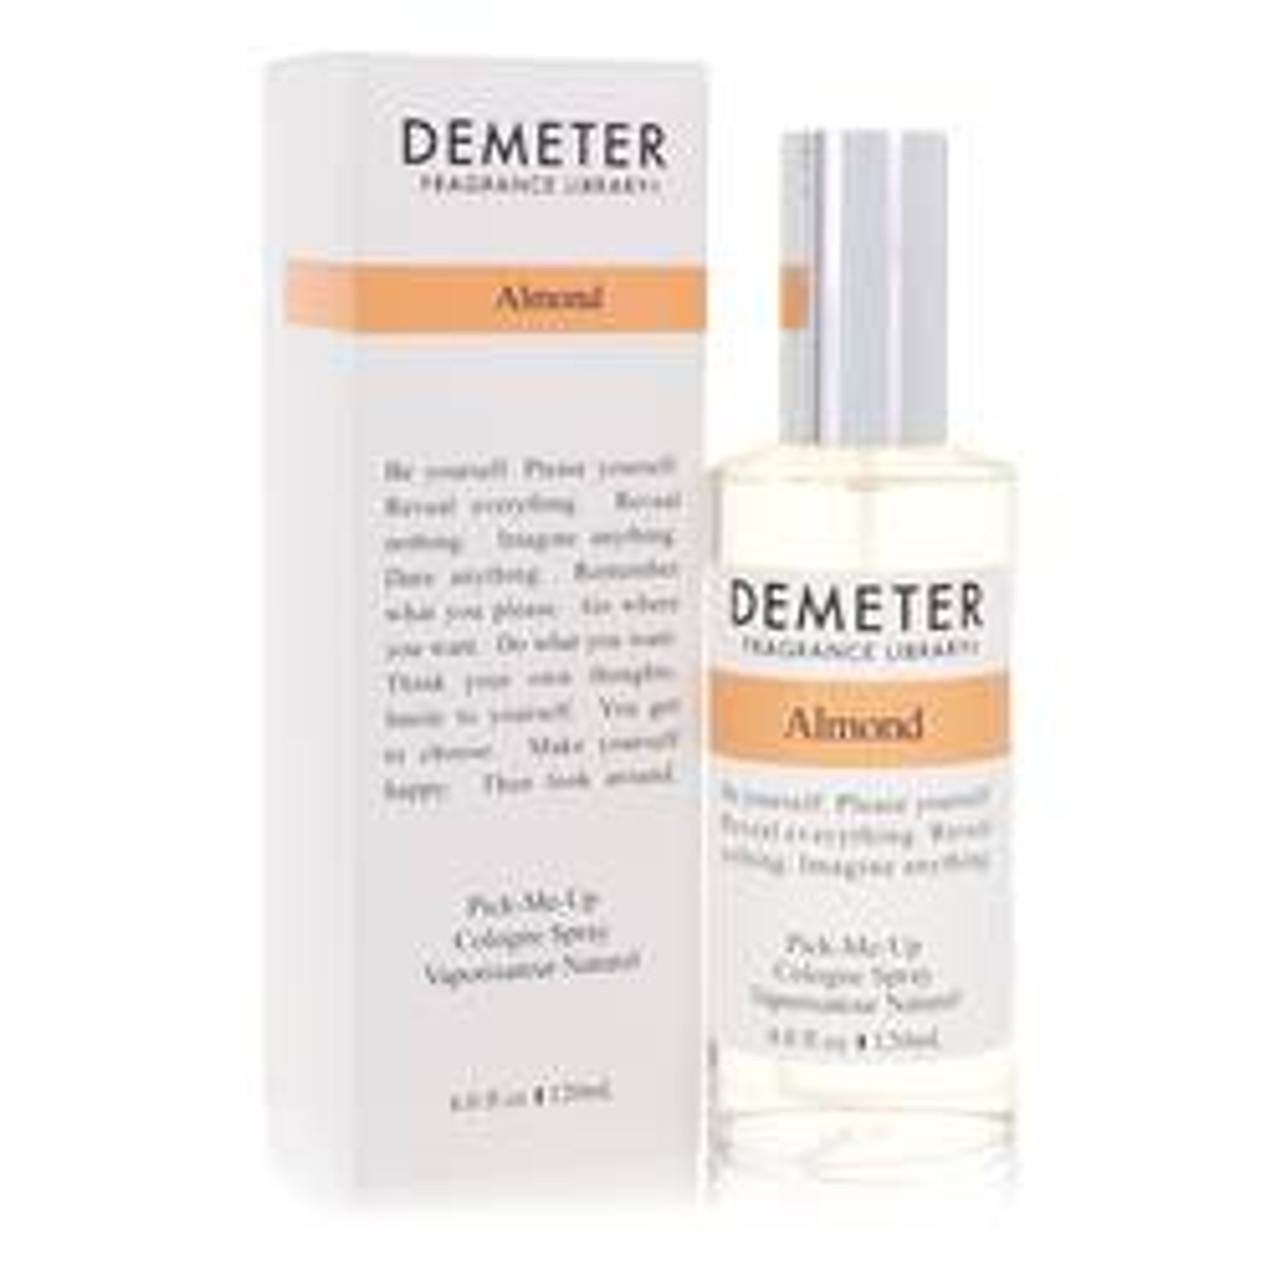 Demeter Almond Perfume By Demeter Cologne Spray (Unisex) 4 oz for Women - [From 79.50 - Choose pk Qty ] - *Ships from Miami